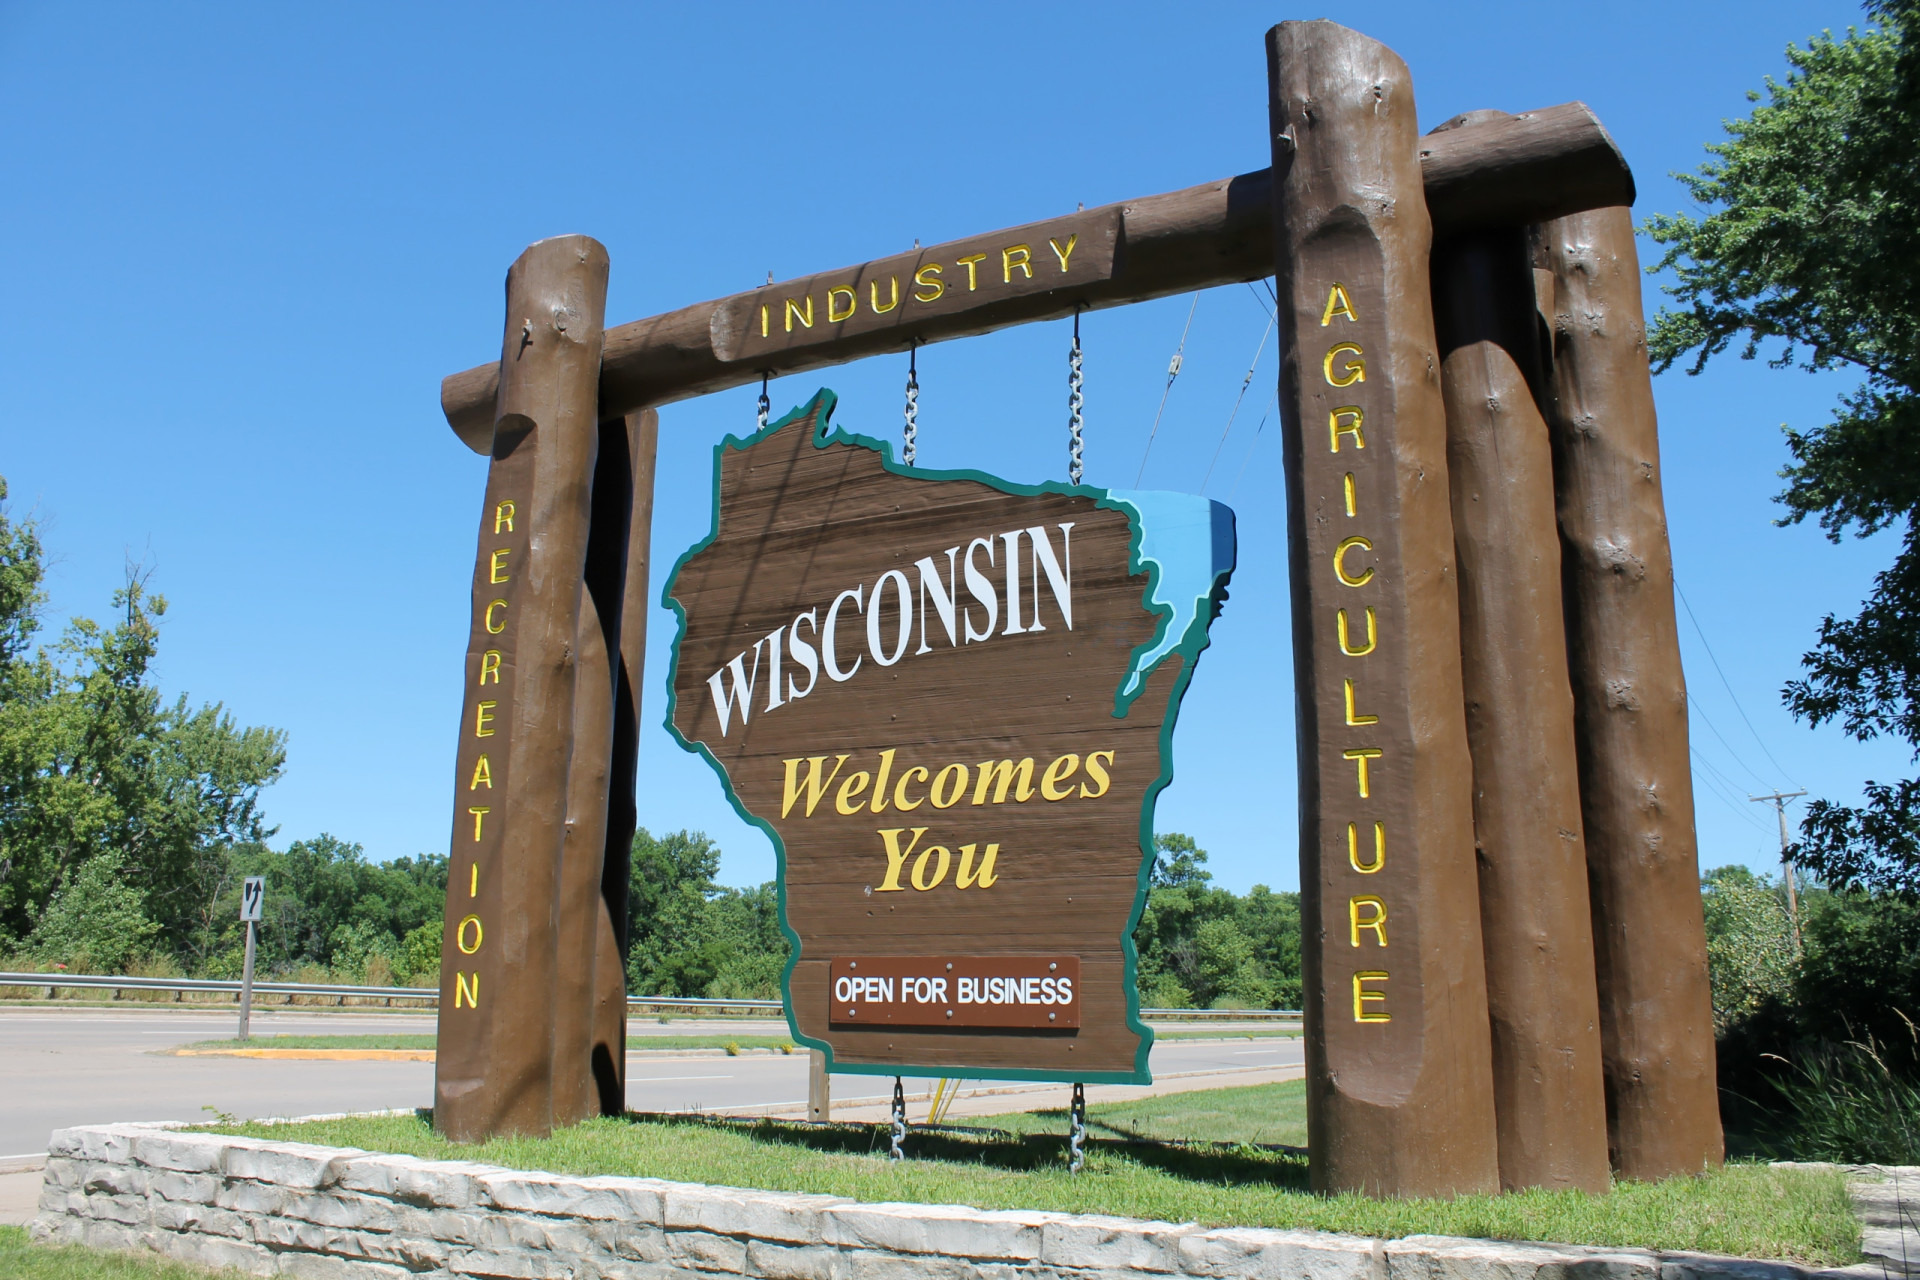 <p>These rustic-looking Wisconsin welcome signs are made from redwood. The logs mention "Recreation," "Industry," and "Agriculture."</p><p><a href="https://www.msn.com/en-us/community/channel/vid-7xx8mnucu55yw63we9va2gwr7uihbxwc68fxqp25x6tg4ftibpra?cvid=94631541bc0f4f89bfd59158d696ad7e">Follow us and access great exclusive content every day</a></p>